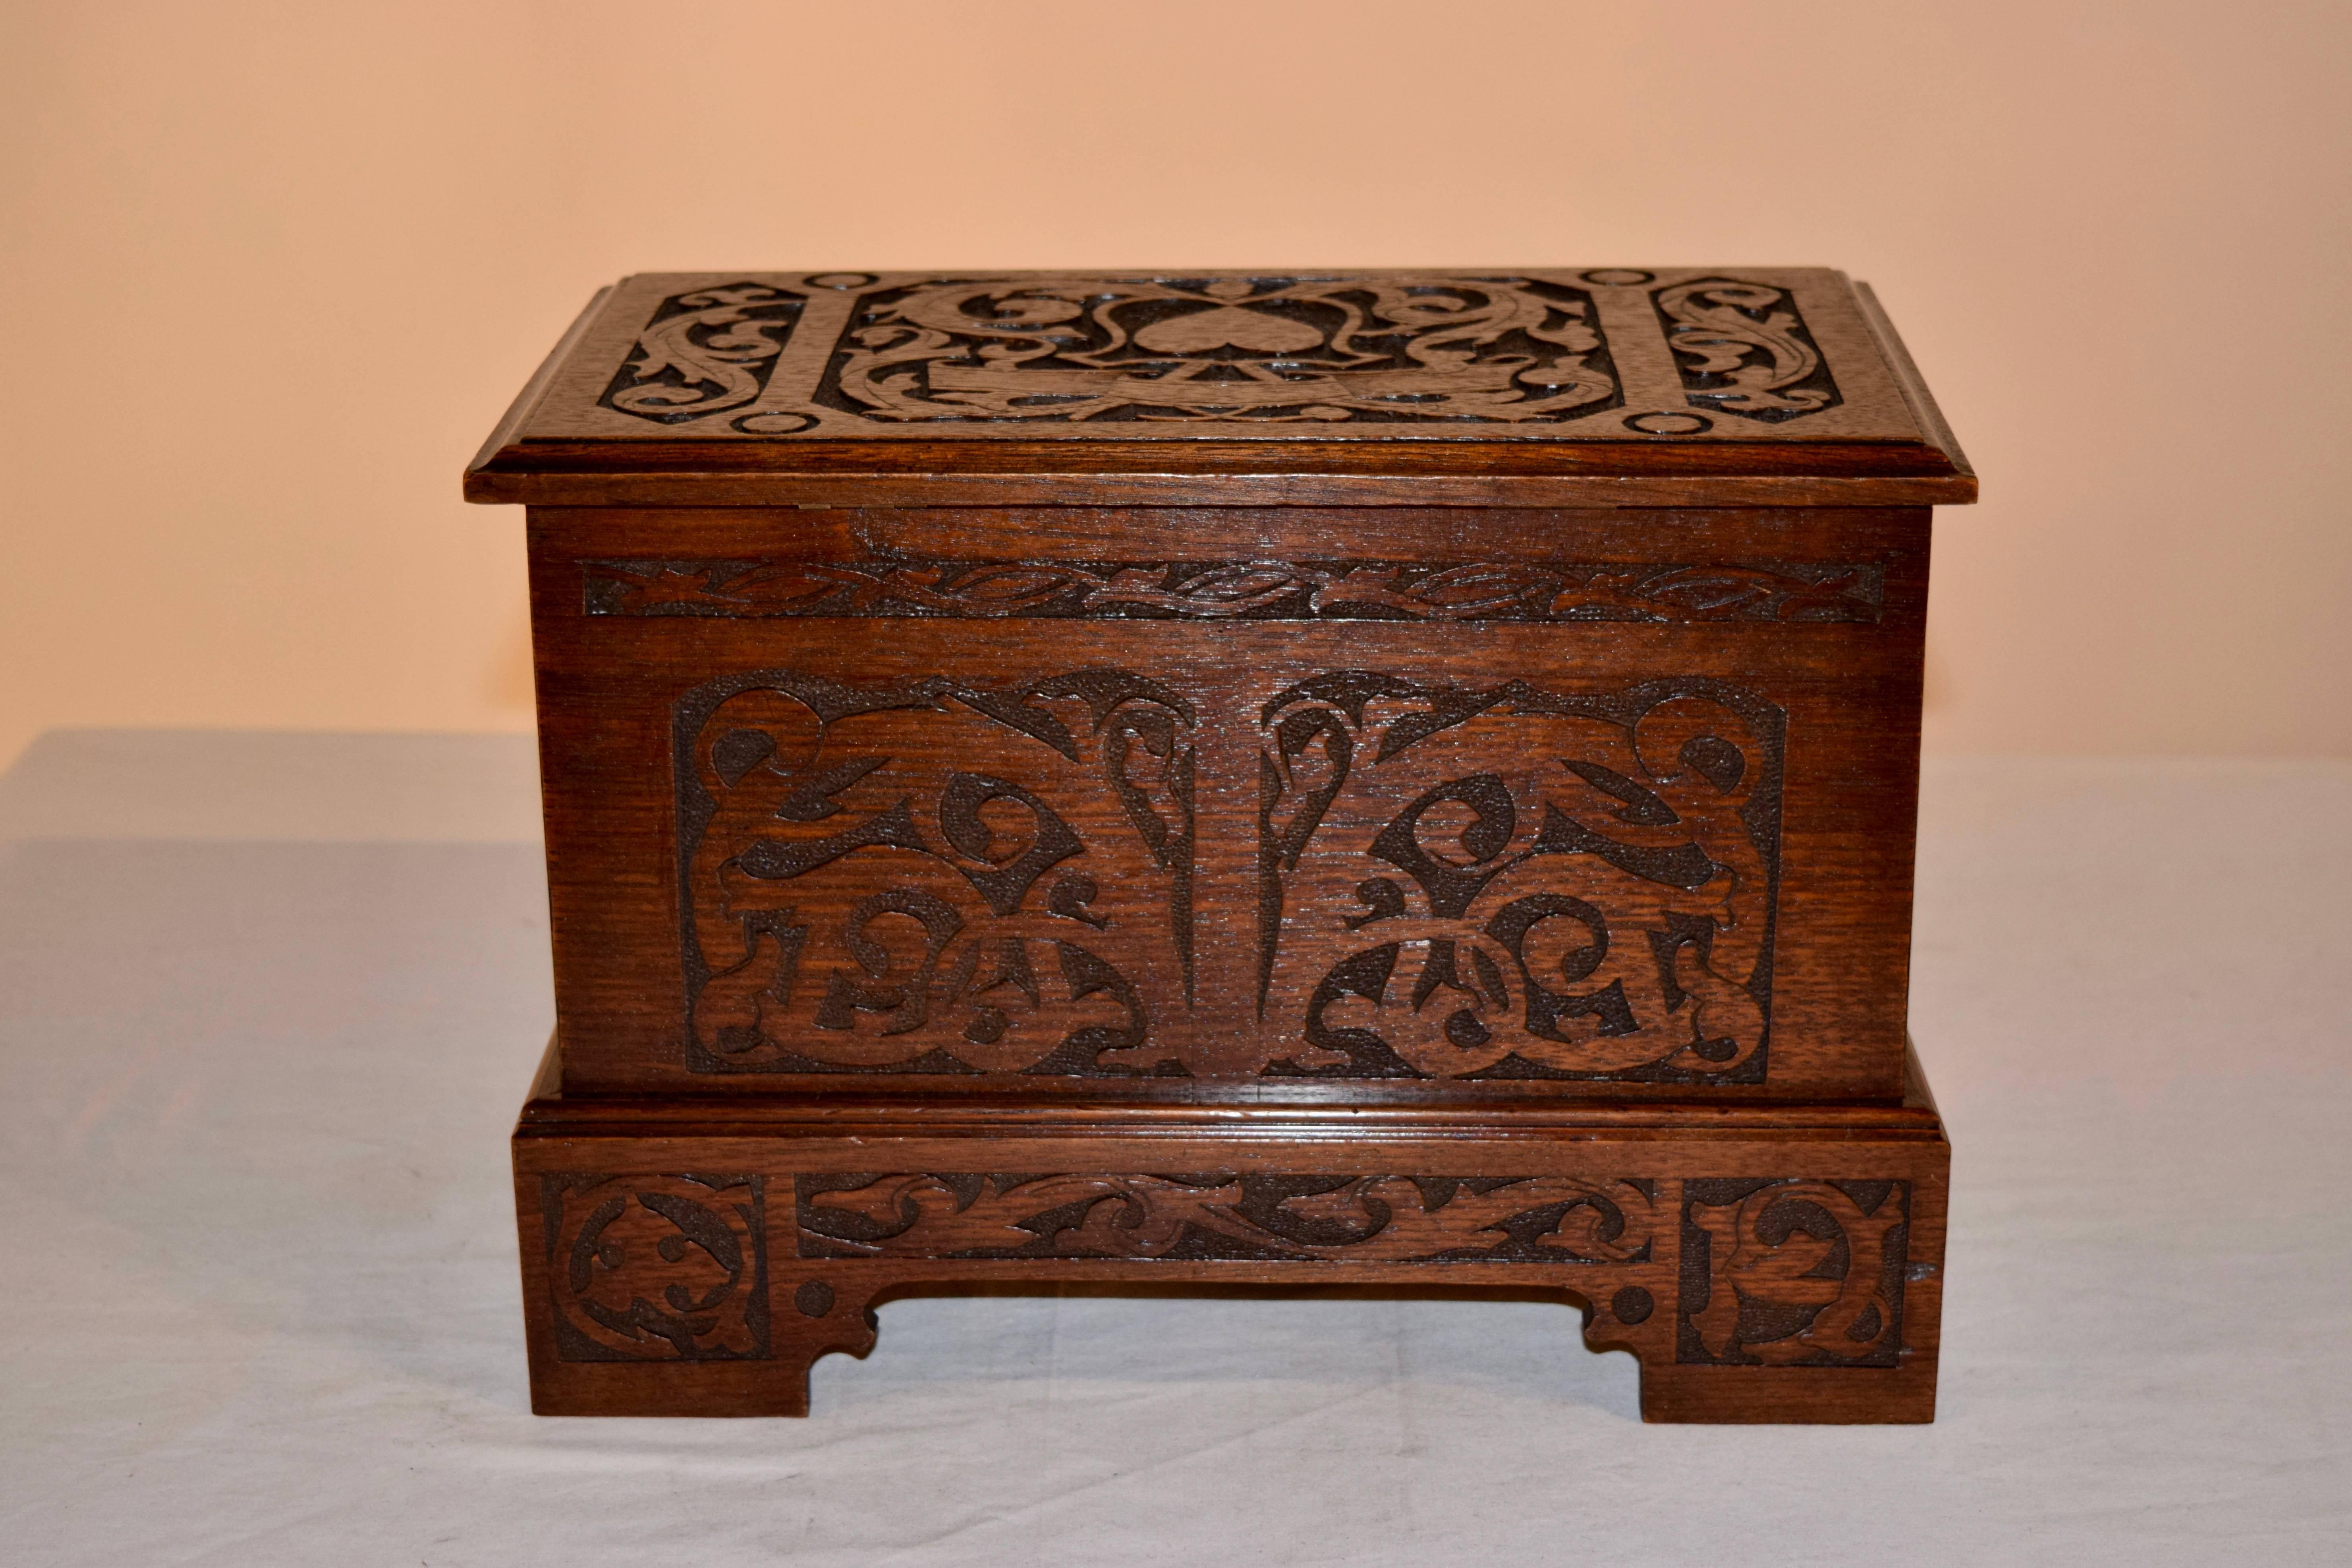 Late 19th century miniature blanket chest with lovely hand-carved decoration on three sides and the top has a carved heart. Great size.